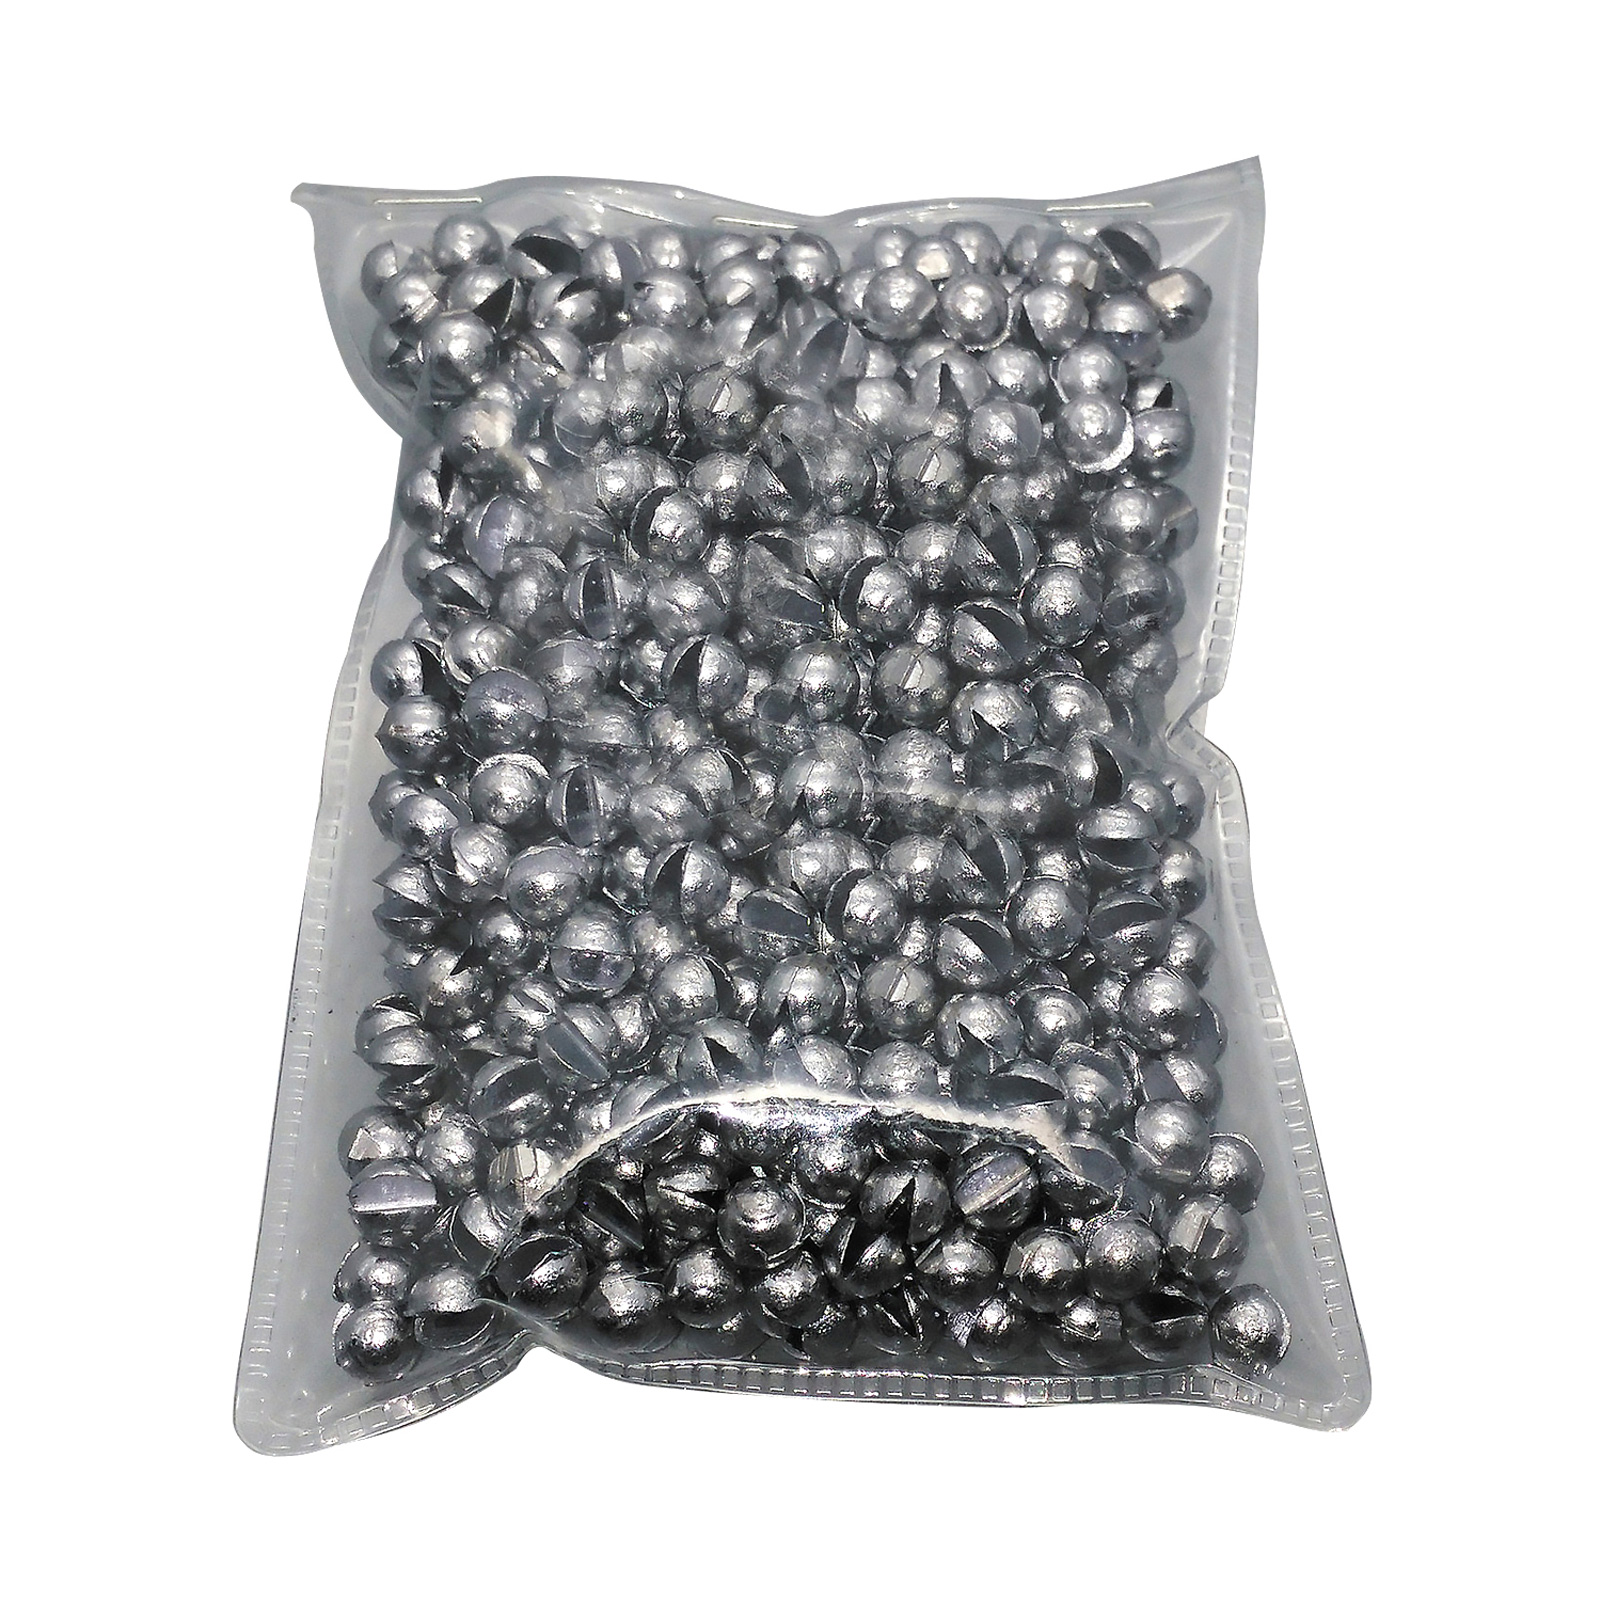 FREE FISHER 500pcs/Bag Fishing Weights Open Split Bite Anti-oxidation Clipped Lead Sinkers Shots 0.2g-1.2g Rock Fishing Accessories